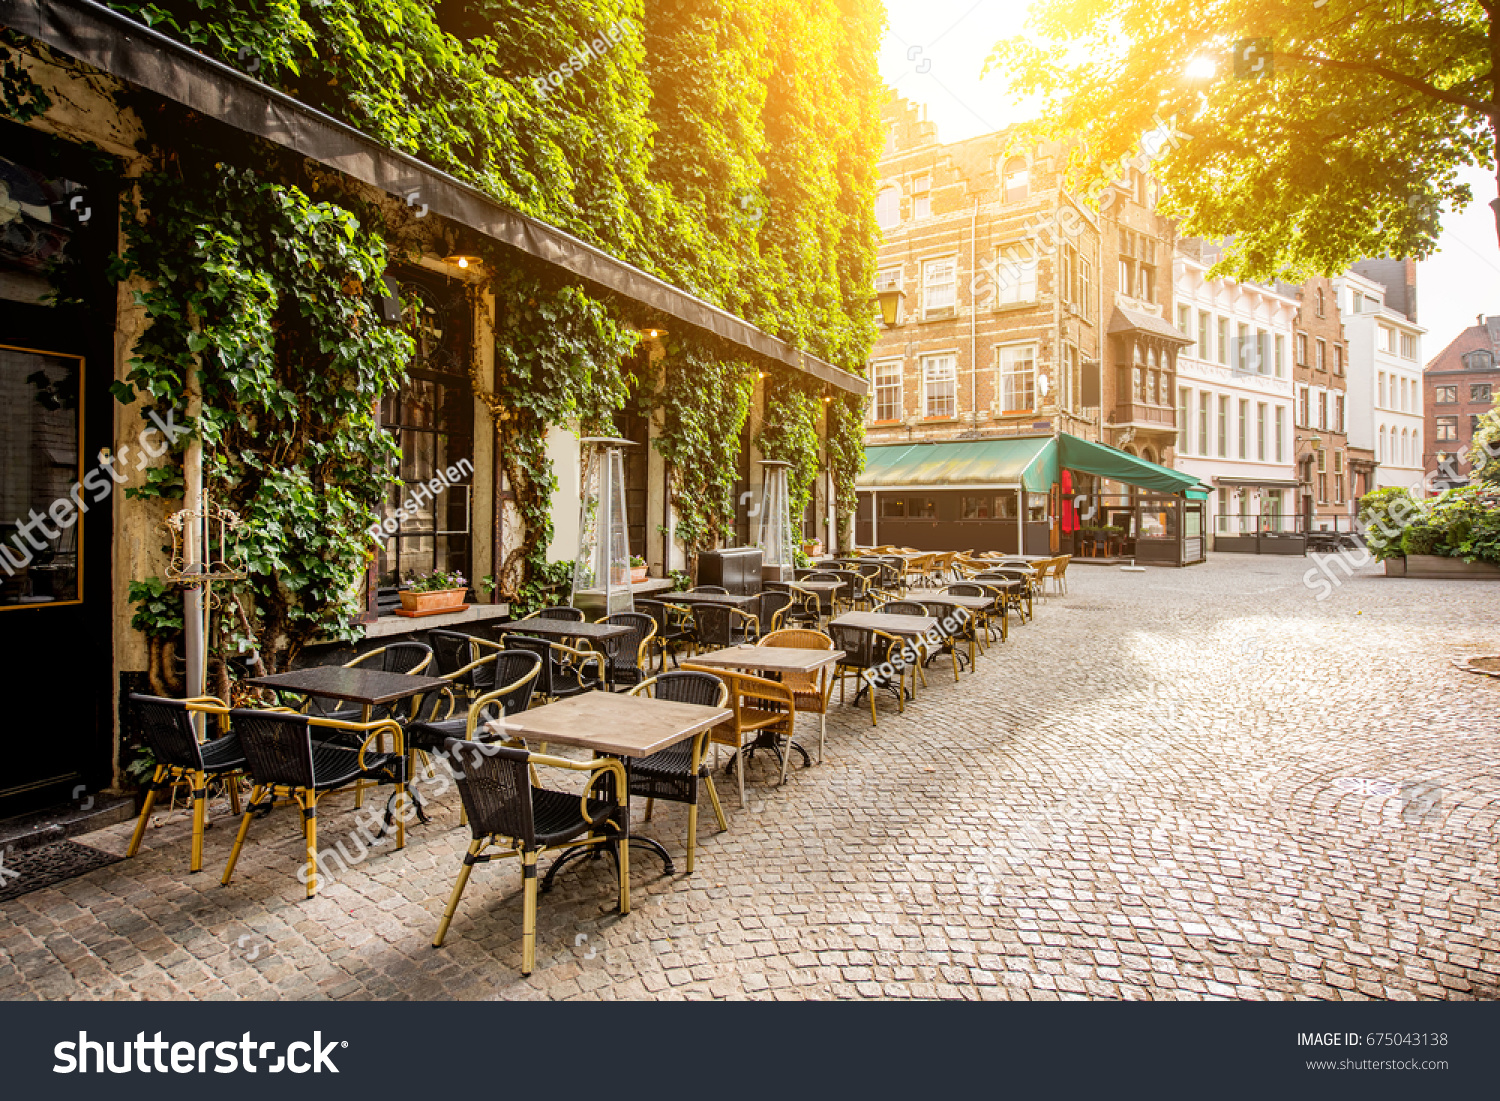 Street view with cafe terrace during the morning in Antwerpen city in Belgium #675043138